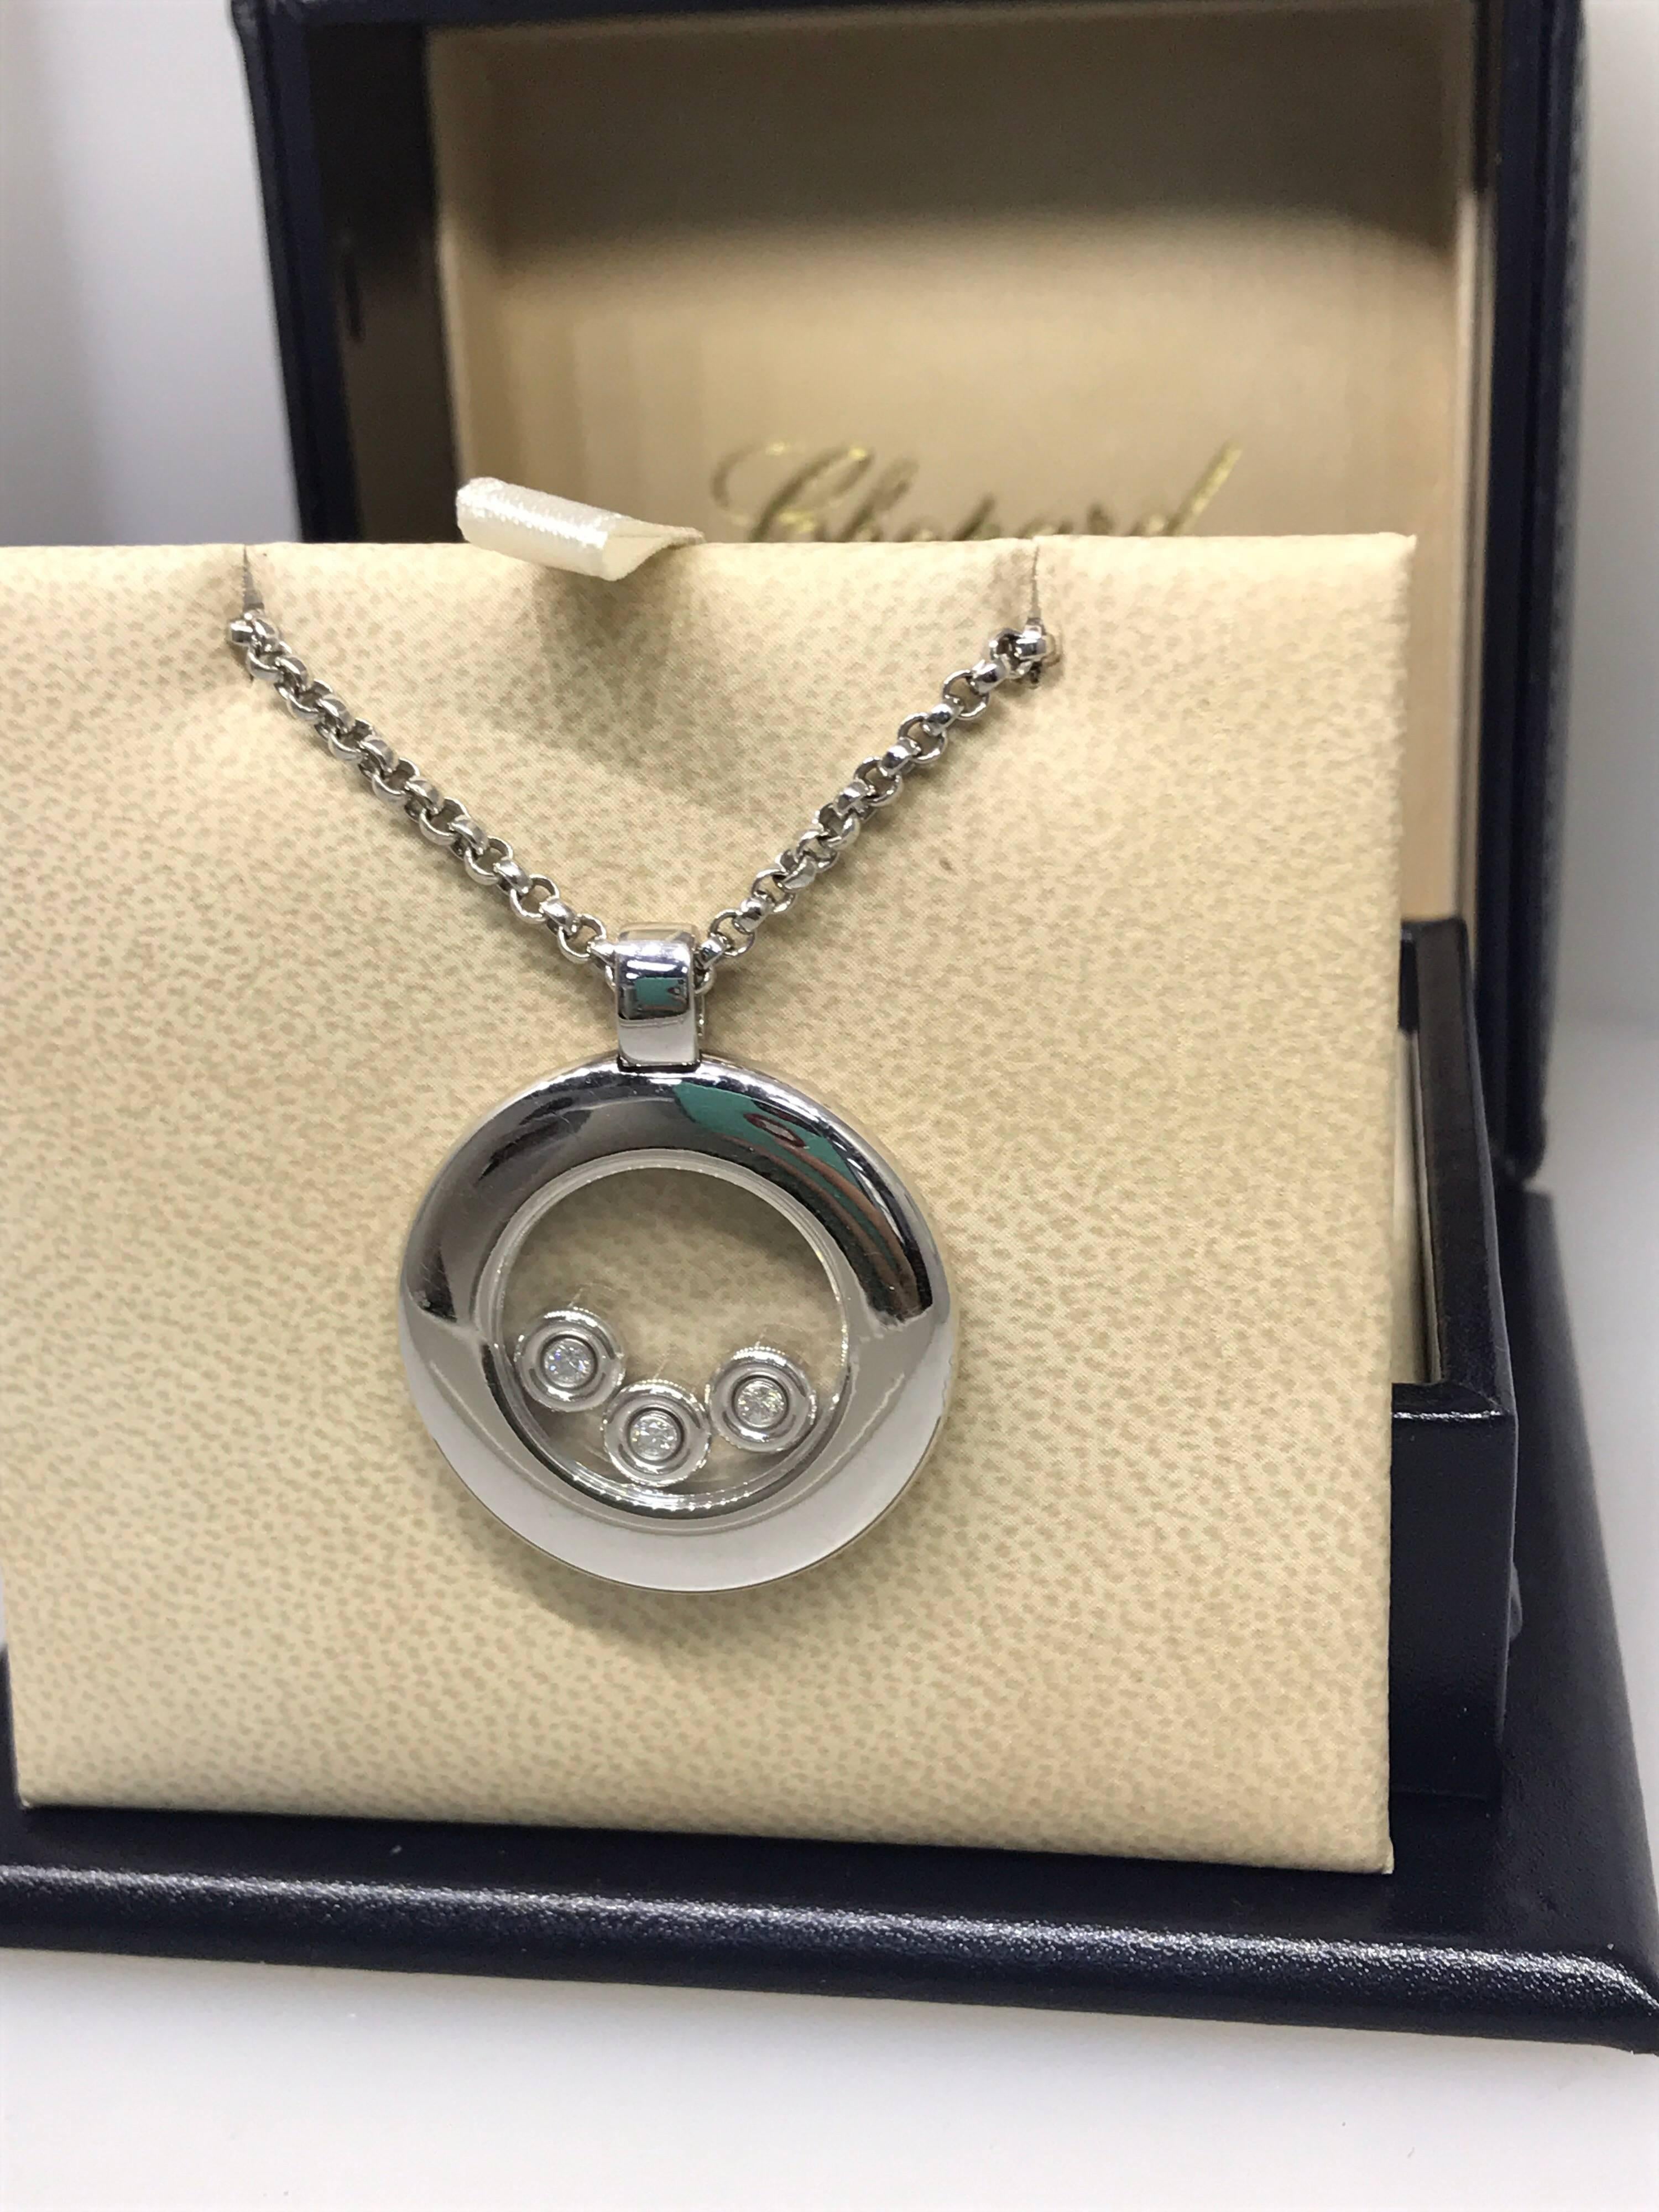 Chopard Happy Diamonds Round Circle Pendant / Necklace

Model Number: 79/7210-1001

100% Authentic

Brand New

Comes with original Chopard box, certificate of authenticity and warranty, and jewels manual

18 Karat White Gold (32.5gr)

3 Floating